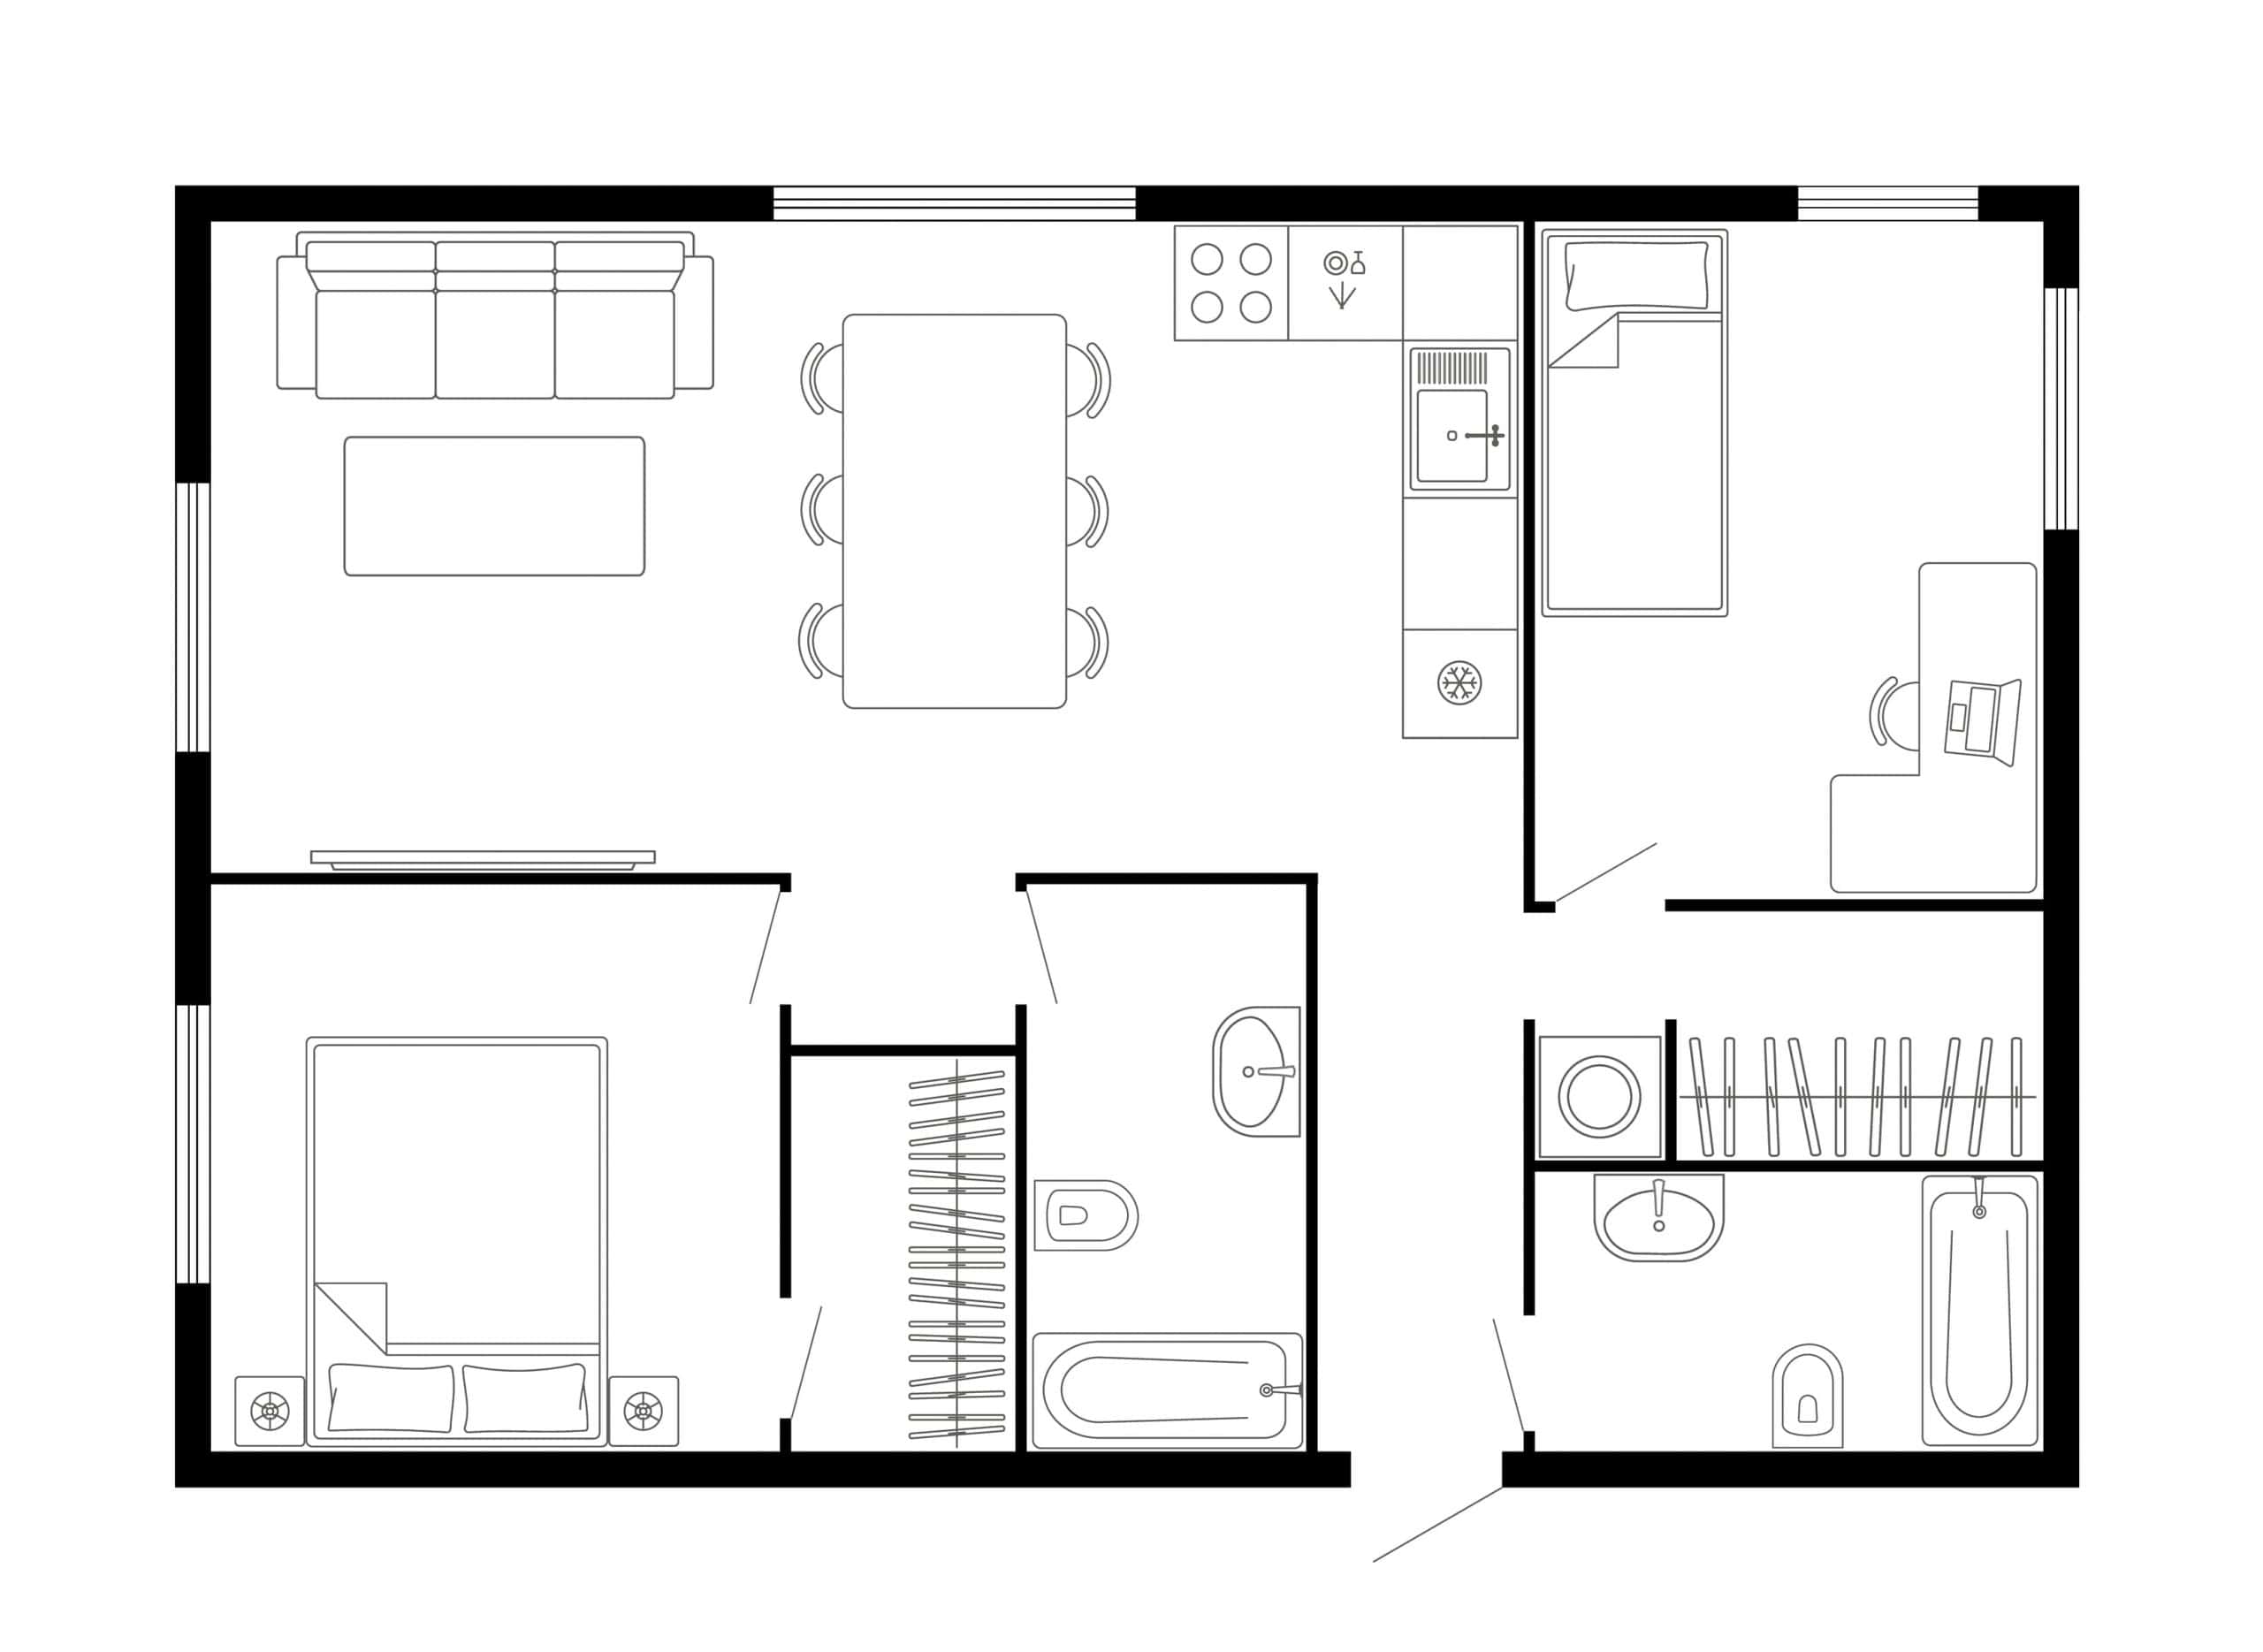 space-efficient 2bhk house plan